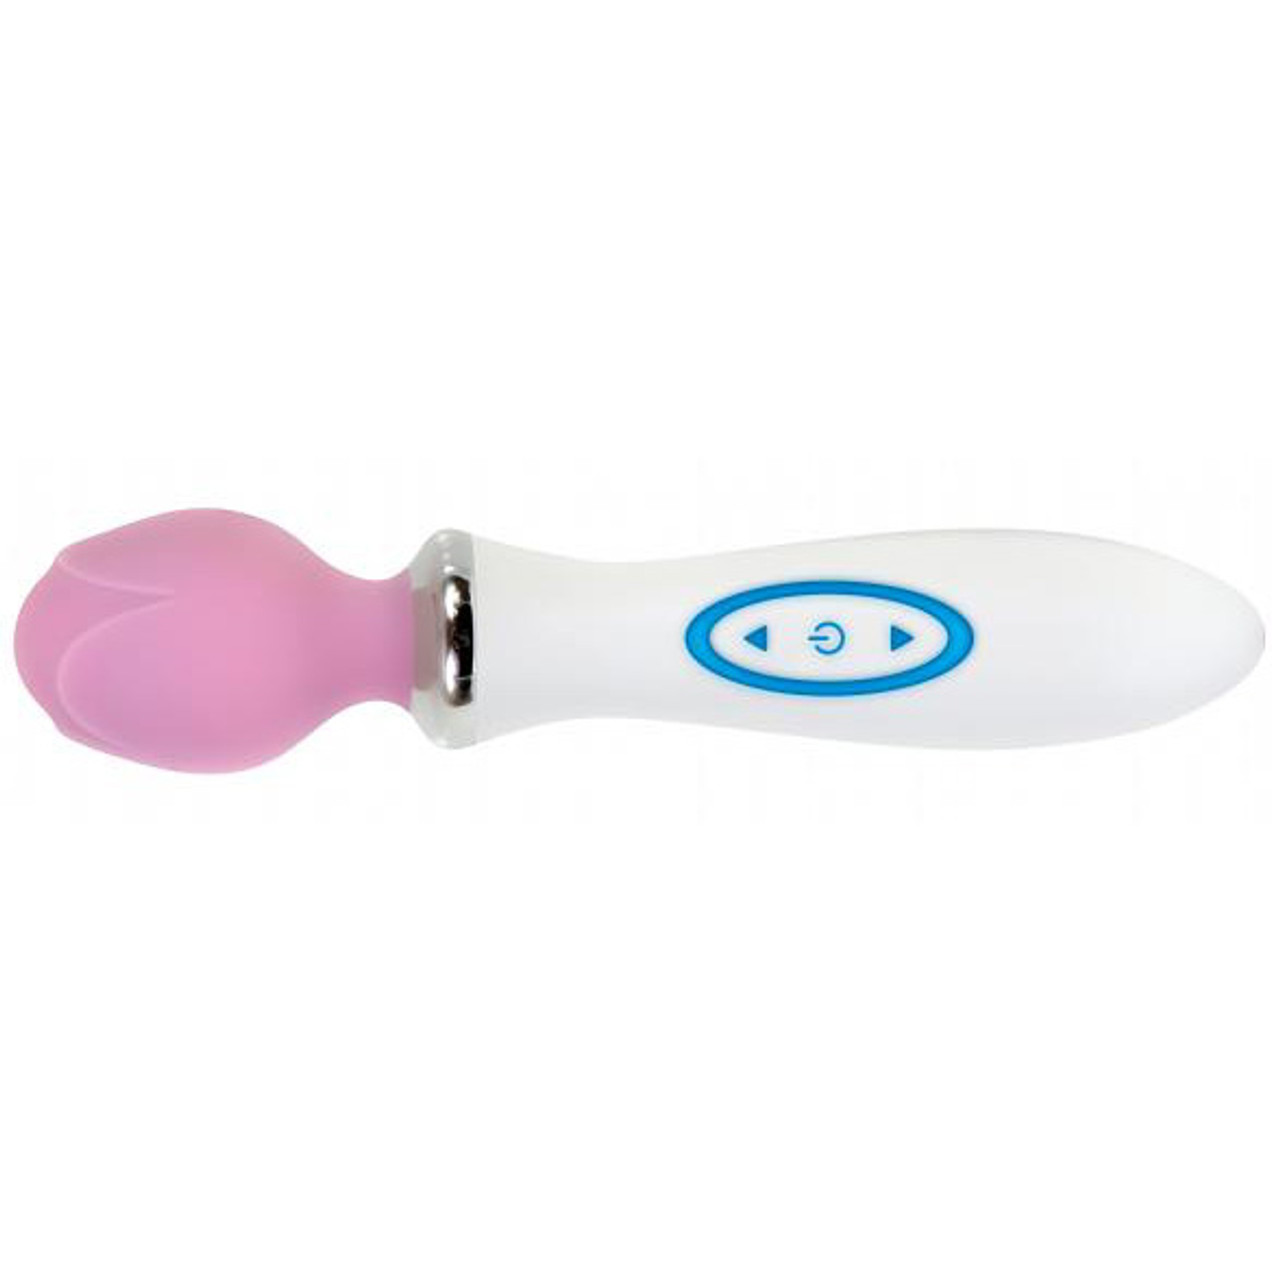 Evolved Novelties Luminous Love Bud 12 Function Rechargeable Silicone Wand Massager Dallas Novelty